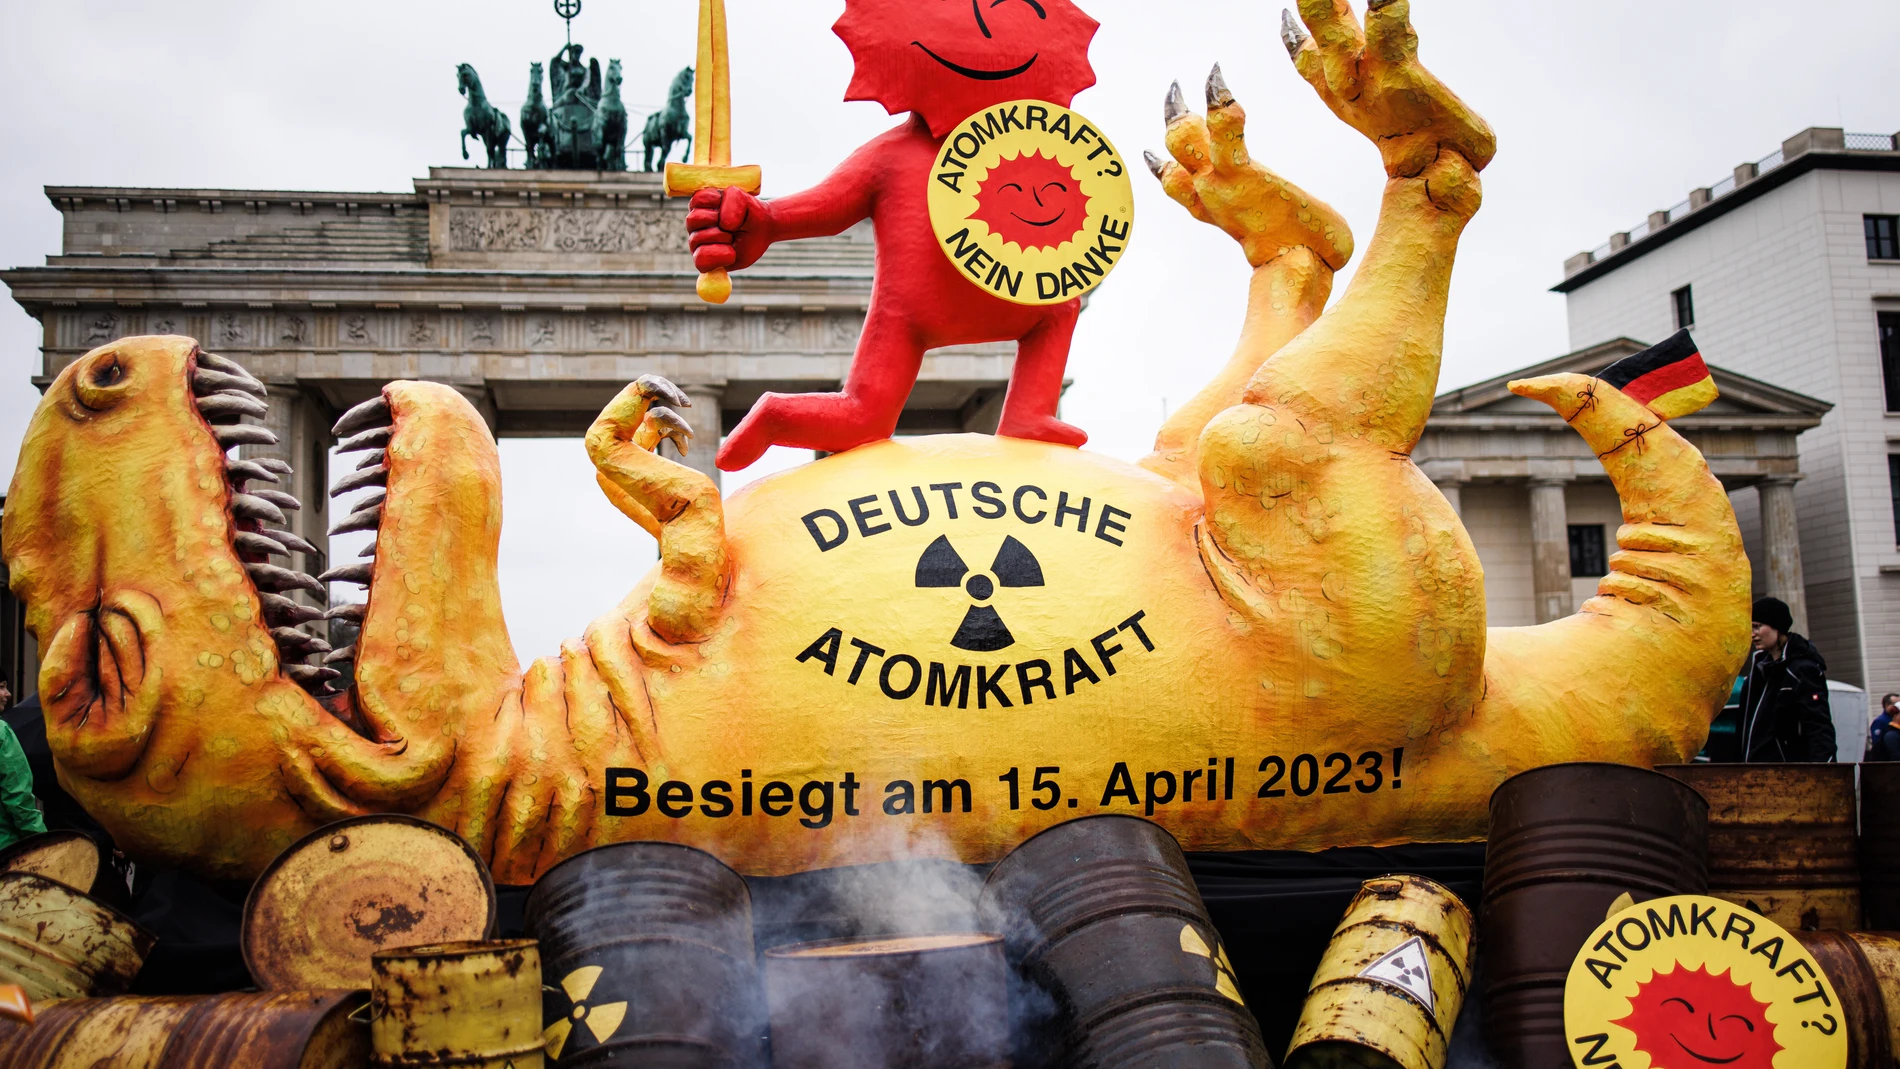 Berlin (Germany), 15/04/2023.- A sculpture of a dead dinosaur is on display during a protest of the environmental organization Greenpeace in front of the Brandenburg Gate in Berlin, Germany, 15 April 2023. Greenpeace displayed a sculpture of a dinosaur, designed by German artist Jacques Tilly, during a protest to mark the day of the nuclear power phase-out in Germany. (Protestas, Alemania) EFE/EPA/CLEMENS BILAN 